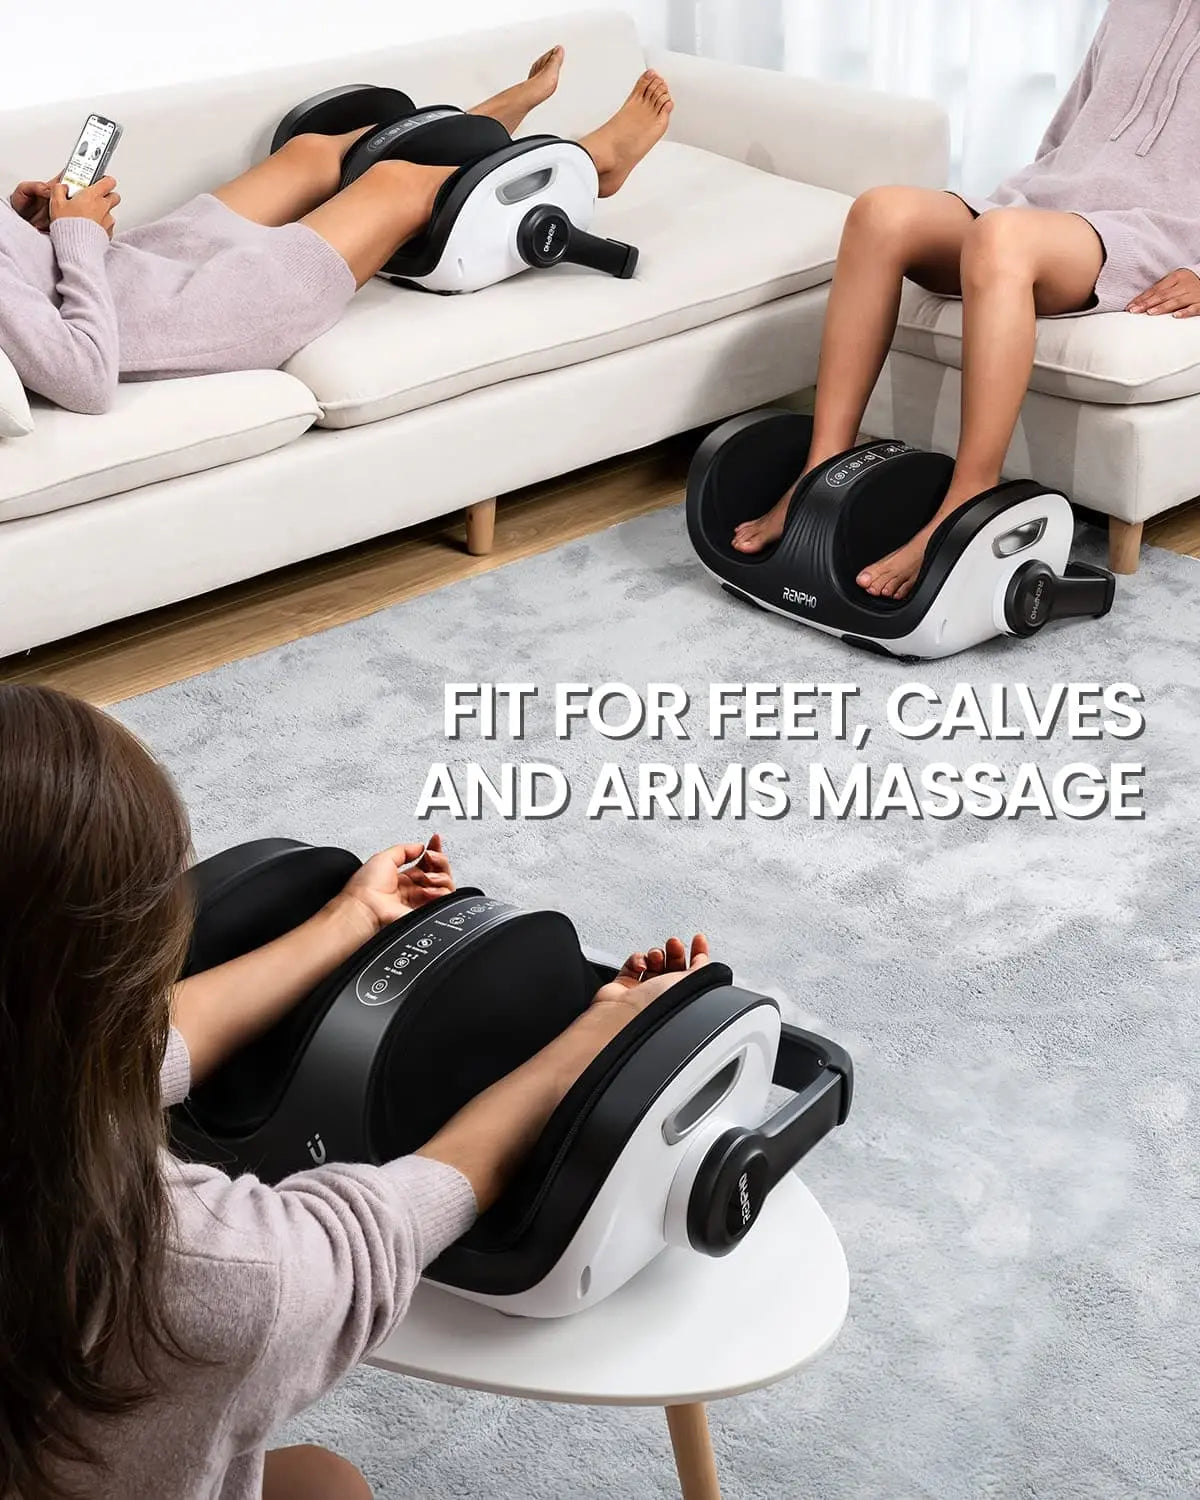 Two people, each sitting on a white couch, use the black and white Shiatsu Foot and Calf Massager by Renpho EU. One person is using it on their forearms while the other enjoys its benefits on their calves. The text "FIT FOR FEET, CALVES AND ARMS MASSAGE" is displayed prominently in the middle of the image.